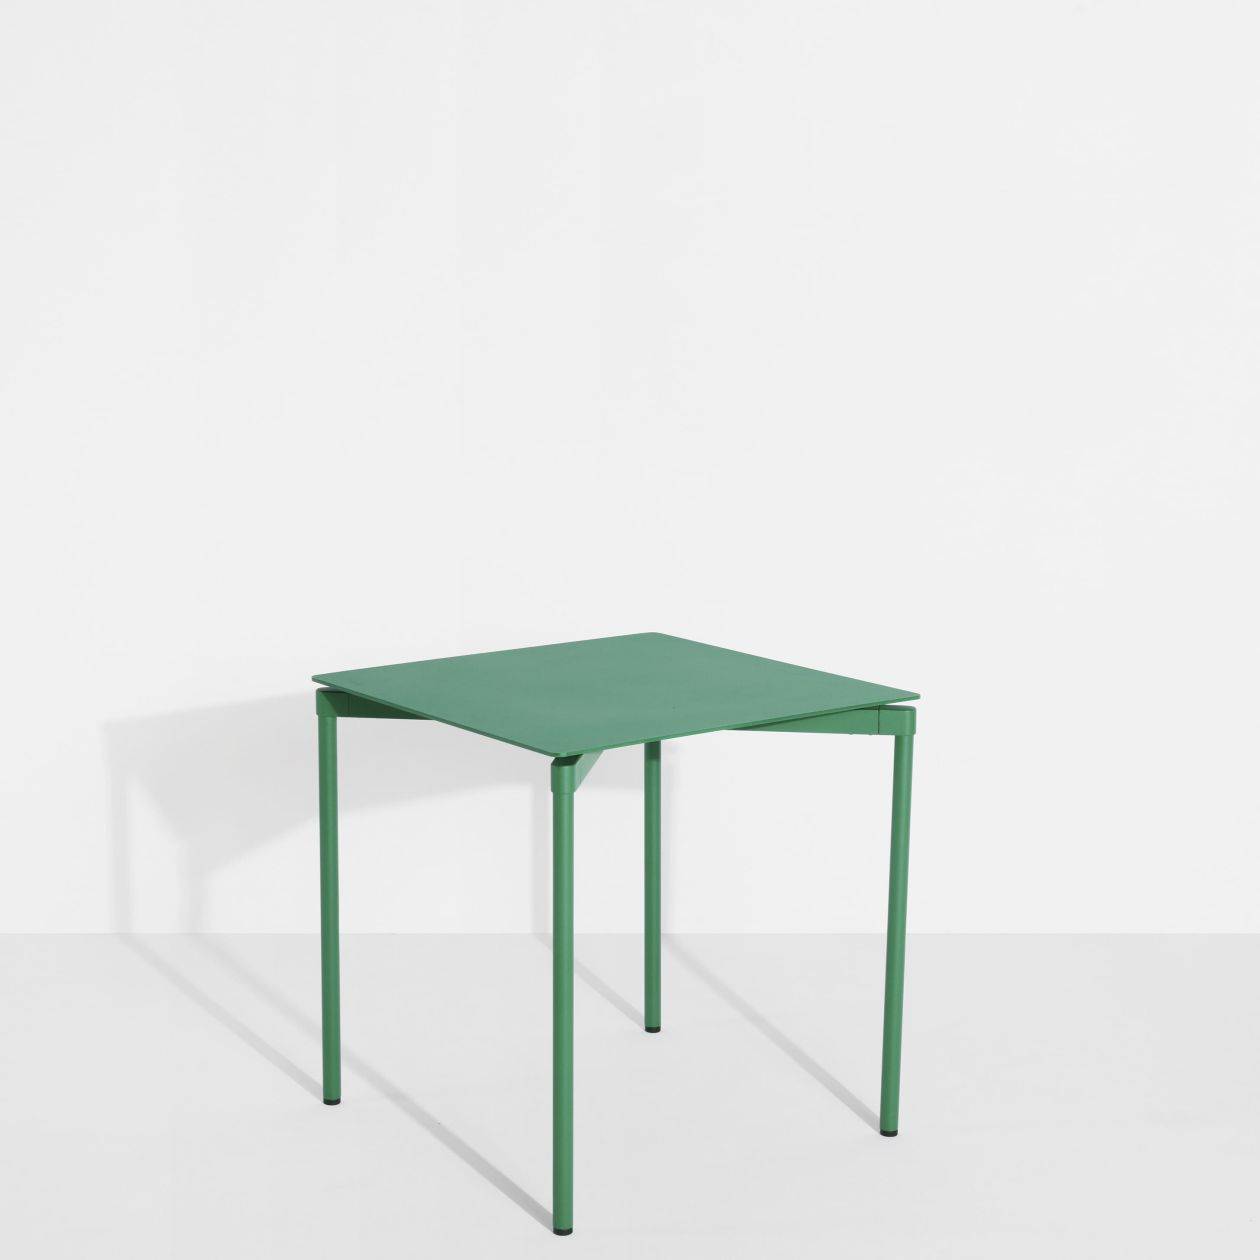 Fromme Square Table - Mint green